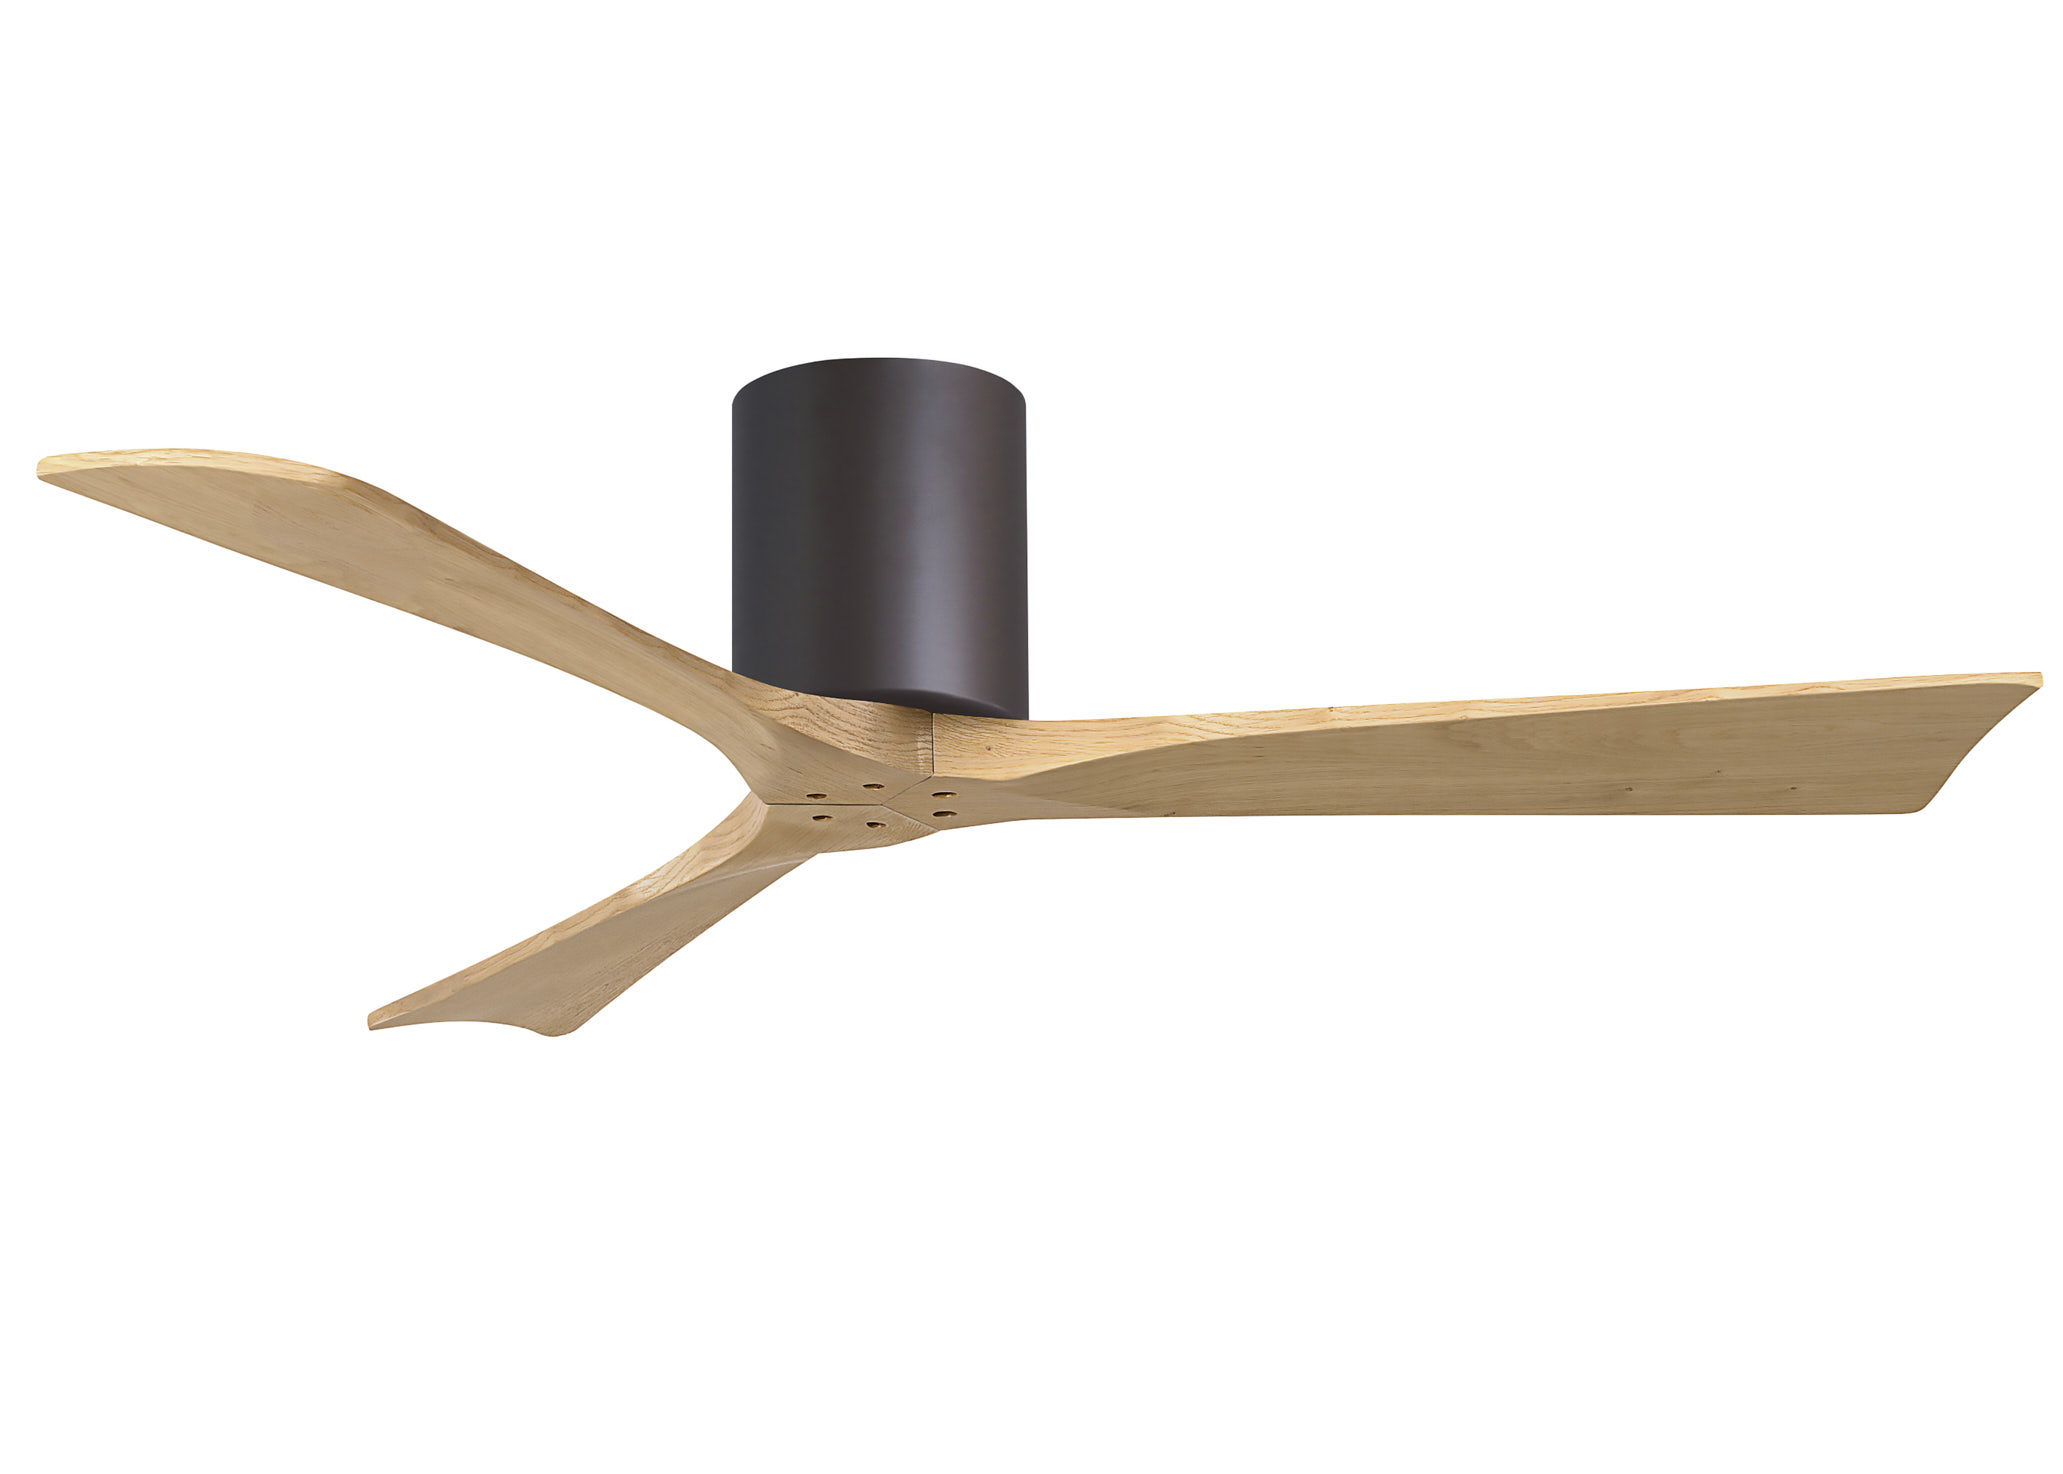 Irene-3H 6-speed ceiling fan in textured bronze finish with 52